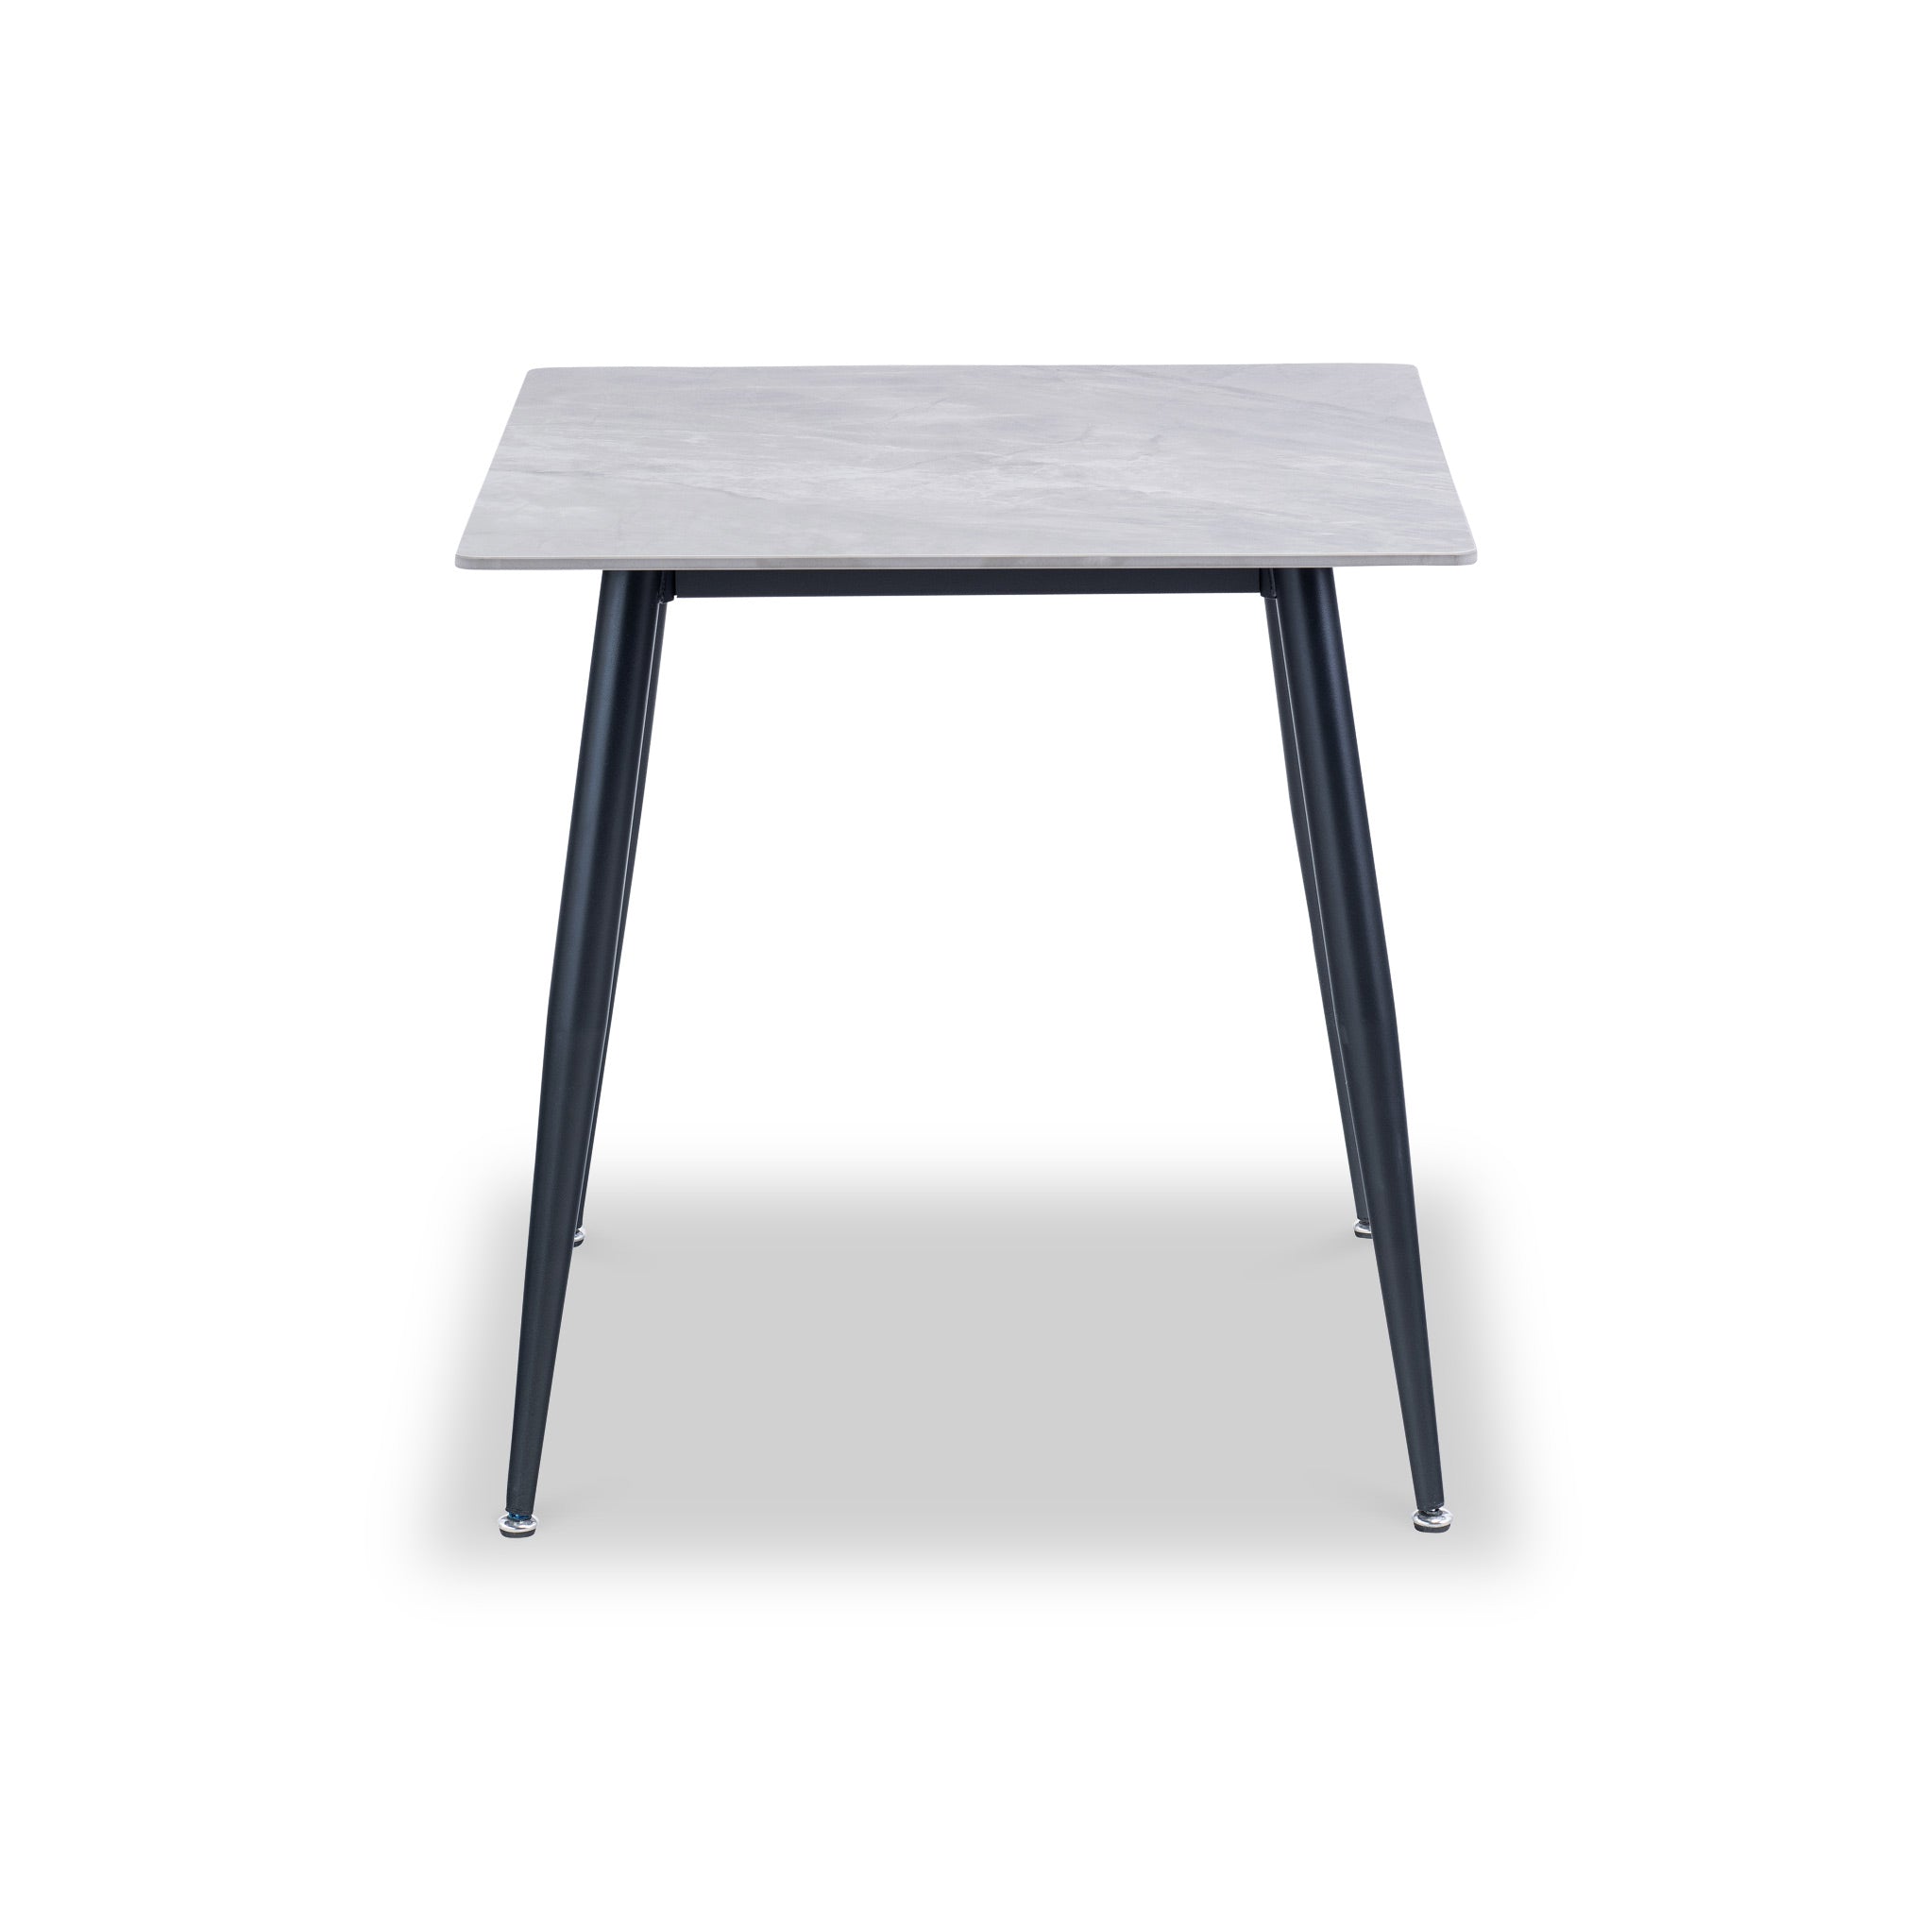 Avril Grey Sintered Stone 75cm Compact Square Dining Table Roseland